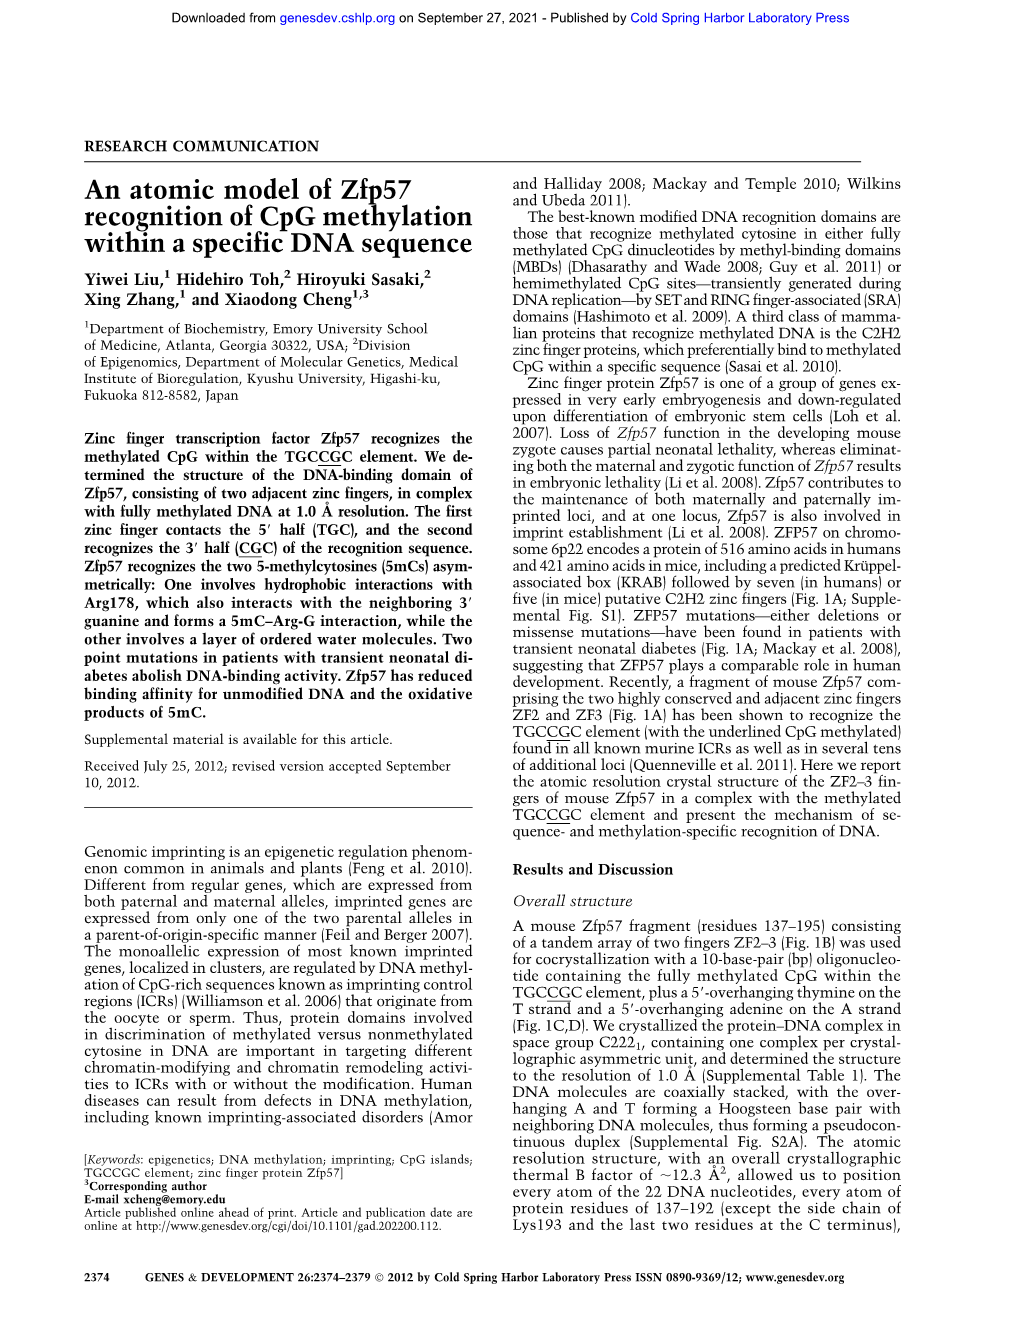 An Atomic Model of Zfp57 Recognition of Cpg Methylation Within a Specific DNA Sequence